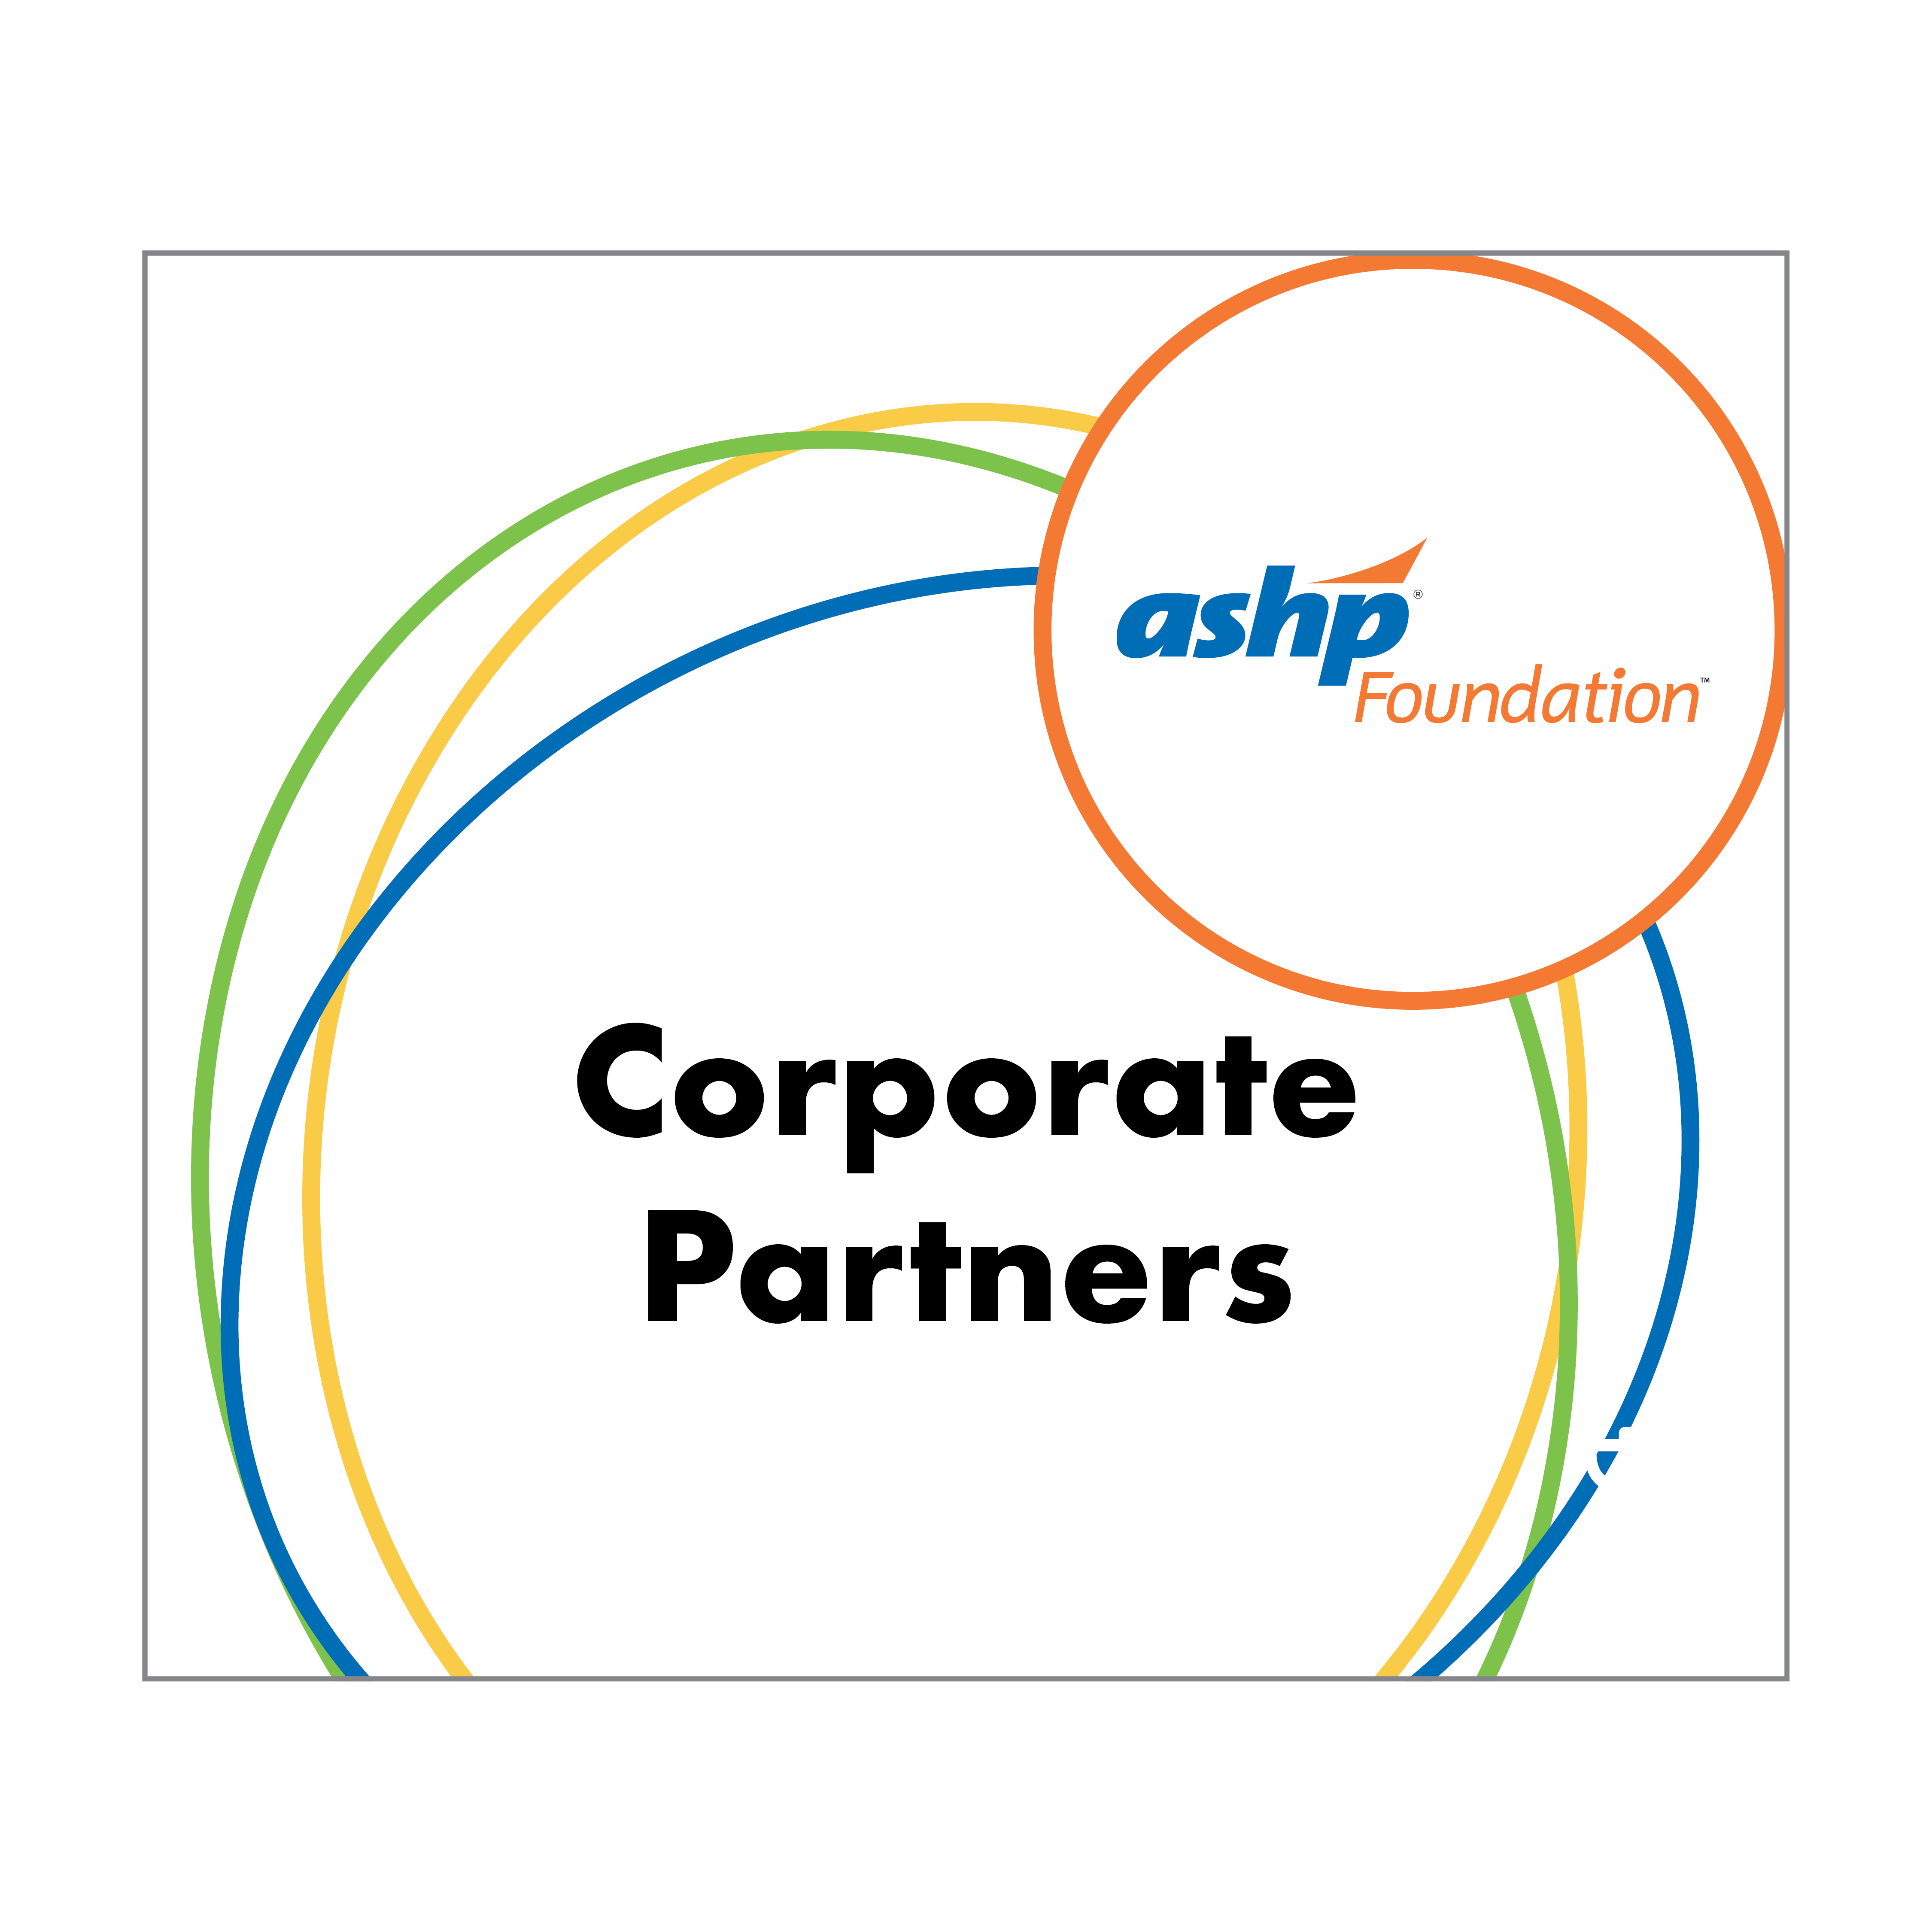 ASHP Foundation logo, concentric circles, text: Corporate Partners